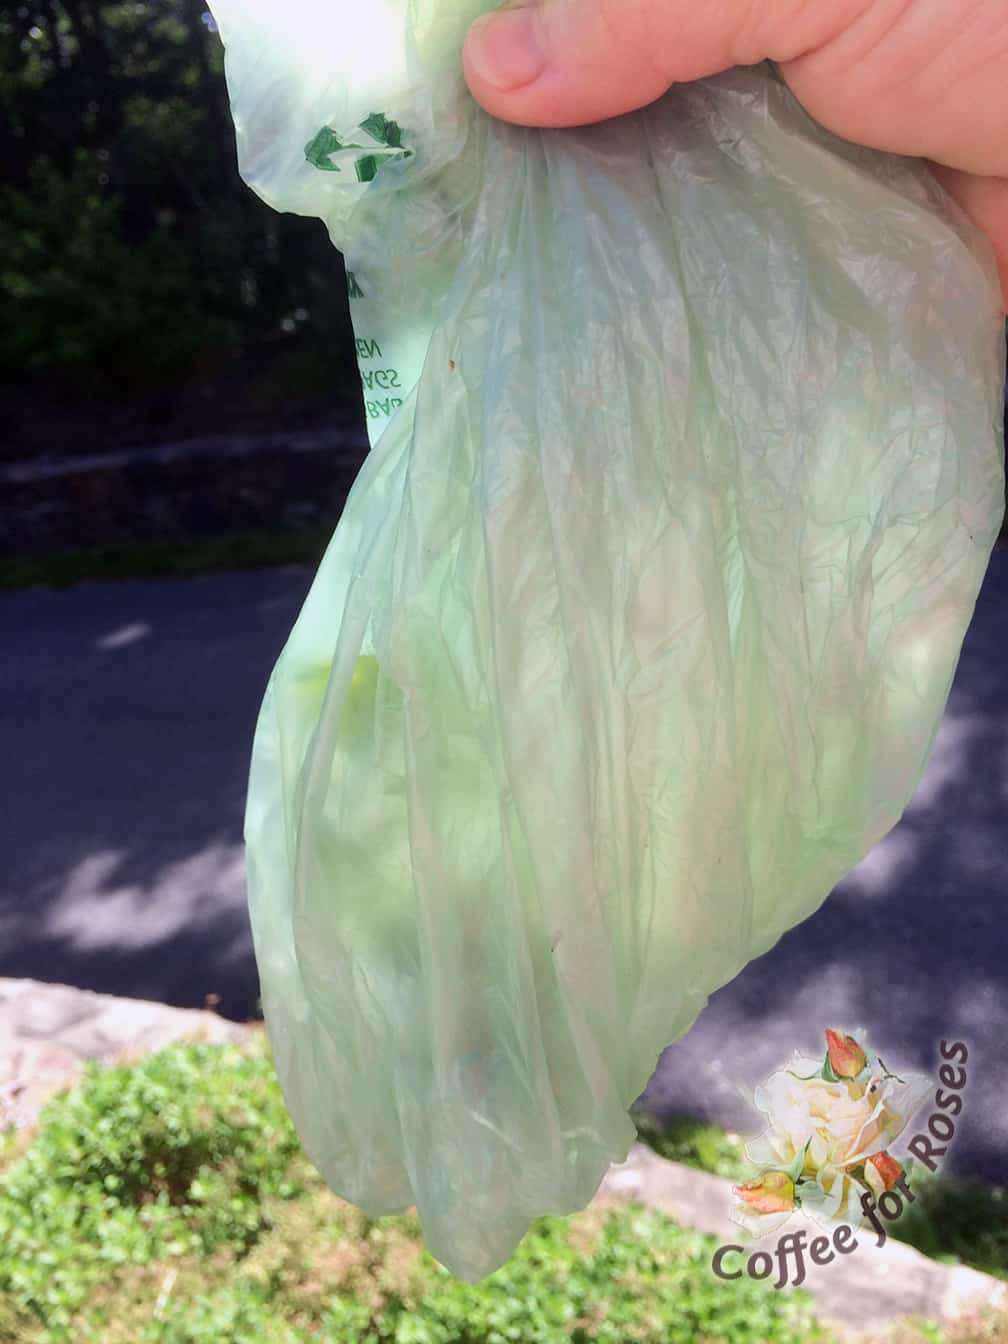 Now you have the plant inside the double bag and it hasn't made contact with your skin. Throw it in the garbage.